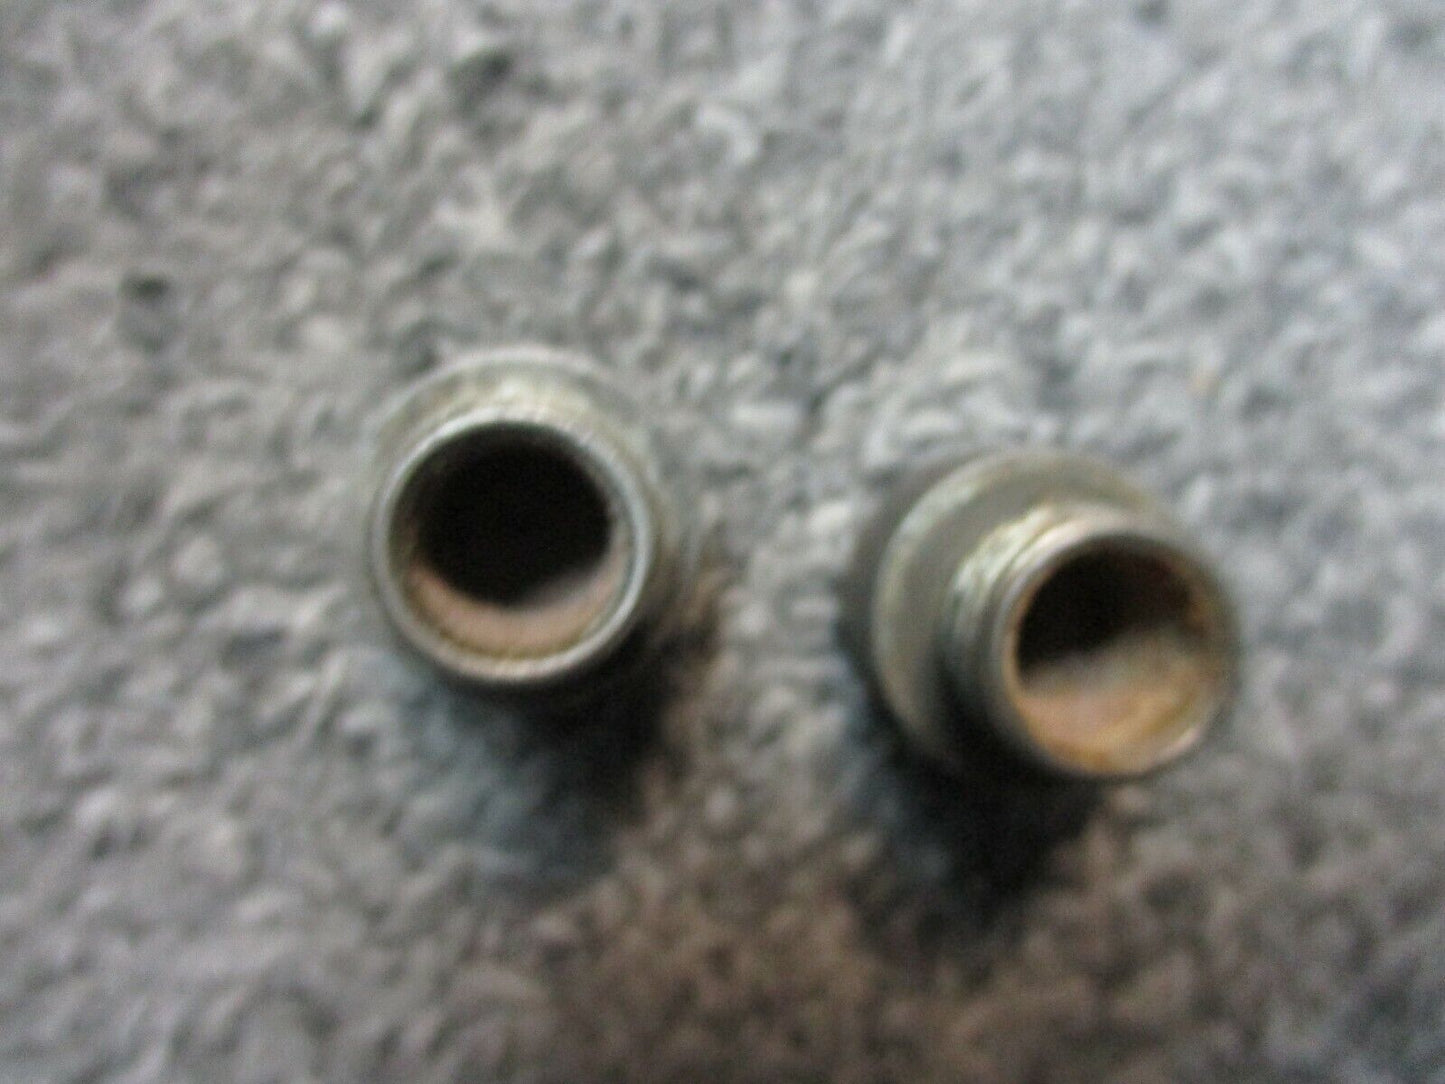 Harley Davidson OEM Oil Pump Check & Relief Valve Slotted Plugs 26263-80